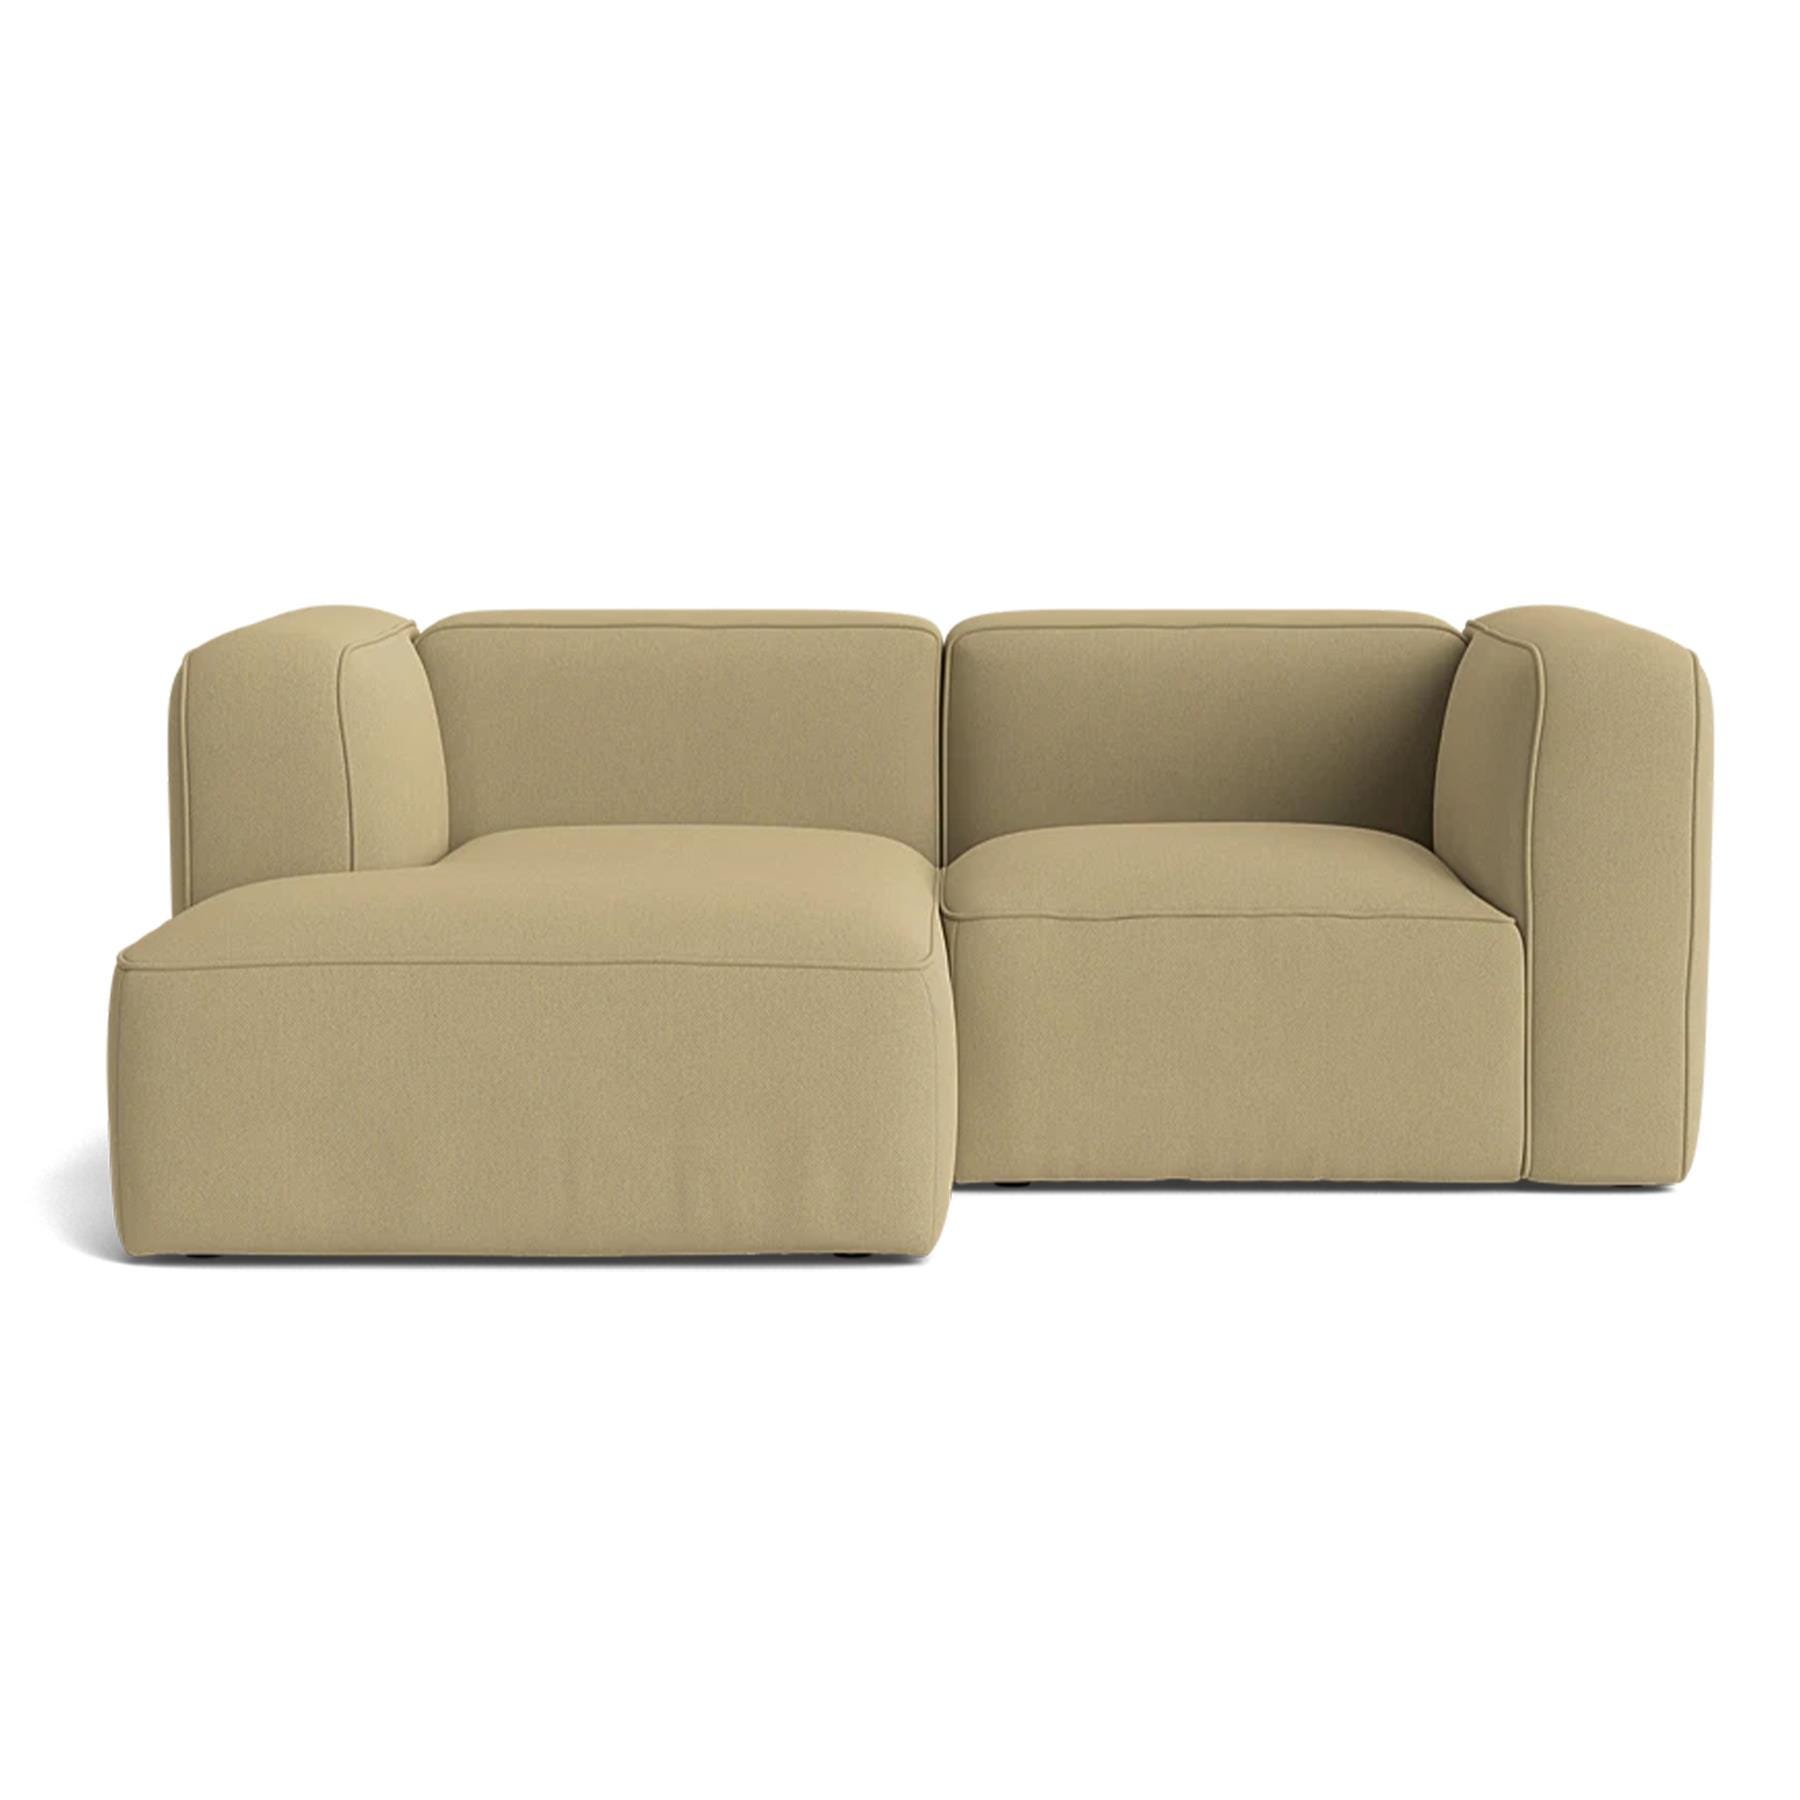 Make Nordic Basecamp Small Sofa Fiord 422 Left Yellow Designer Furniture From Holloways Of Ludlow